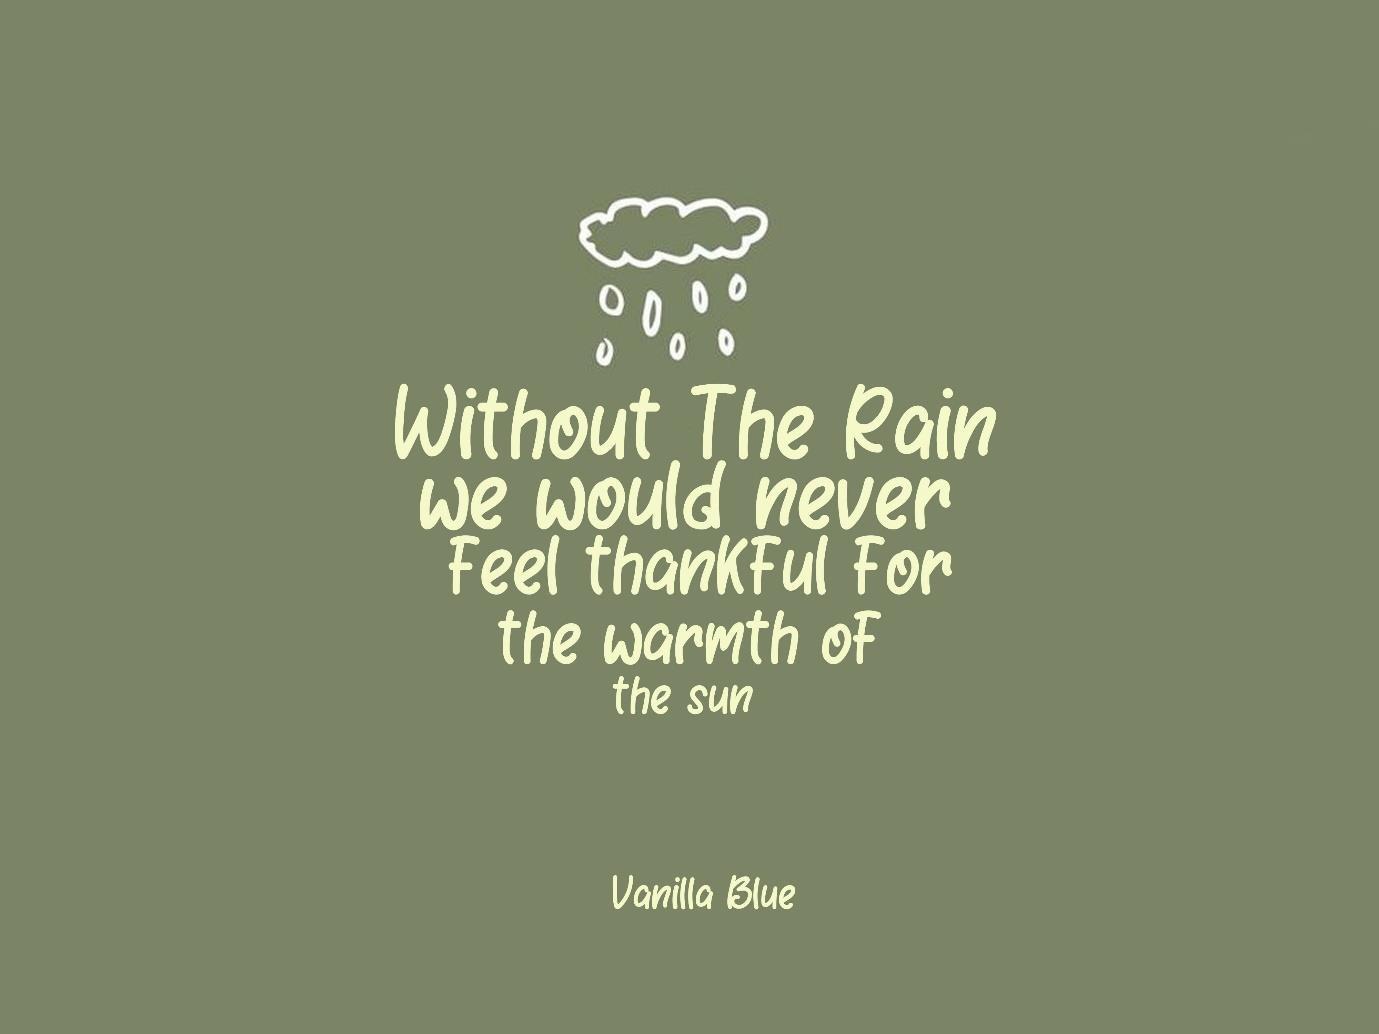 Without the Rain, We Would Never Feel Thankful for the Warmth of the Sun